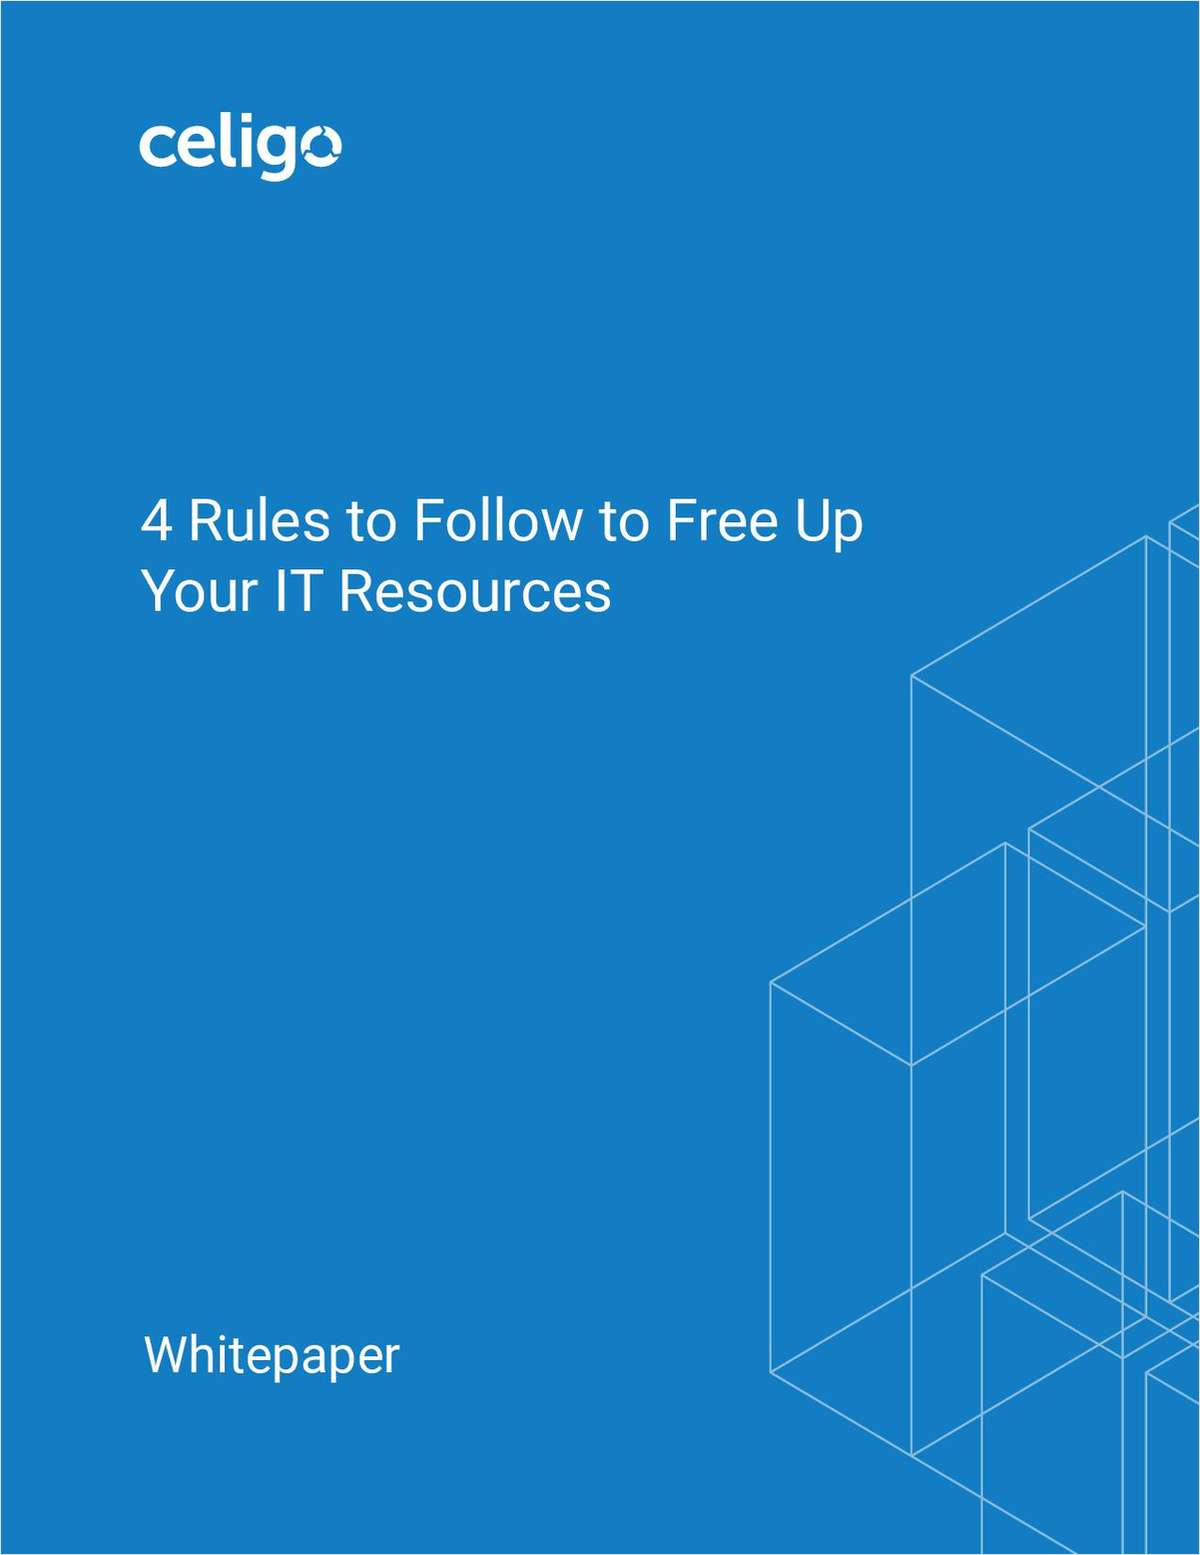 4 Rules to Follow to Free Up Your IT Resources with an Integration Platform